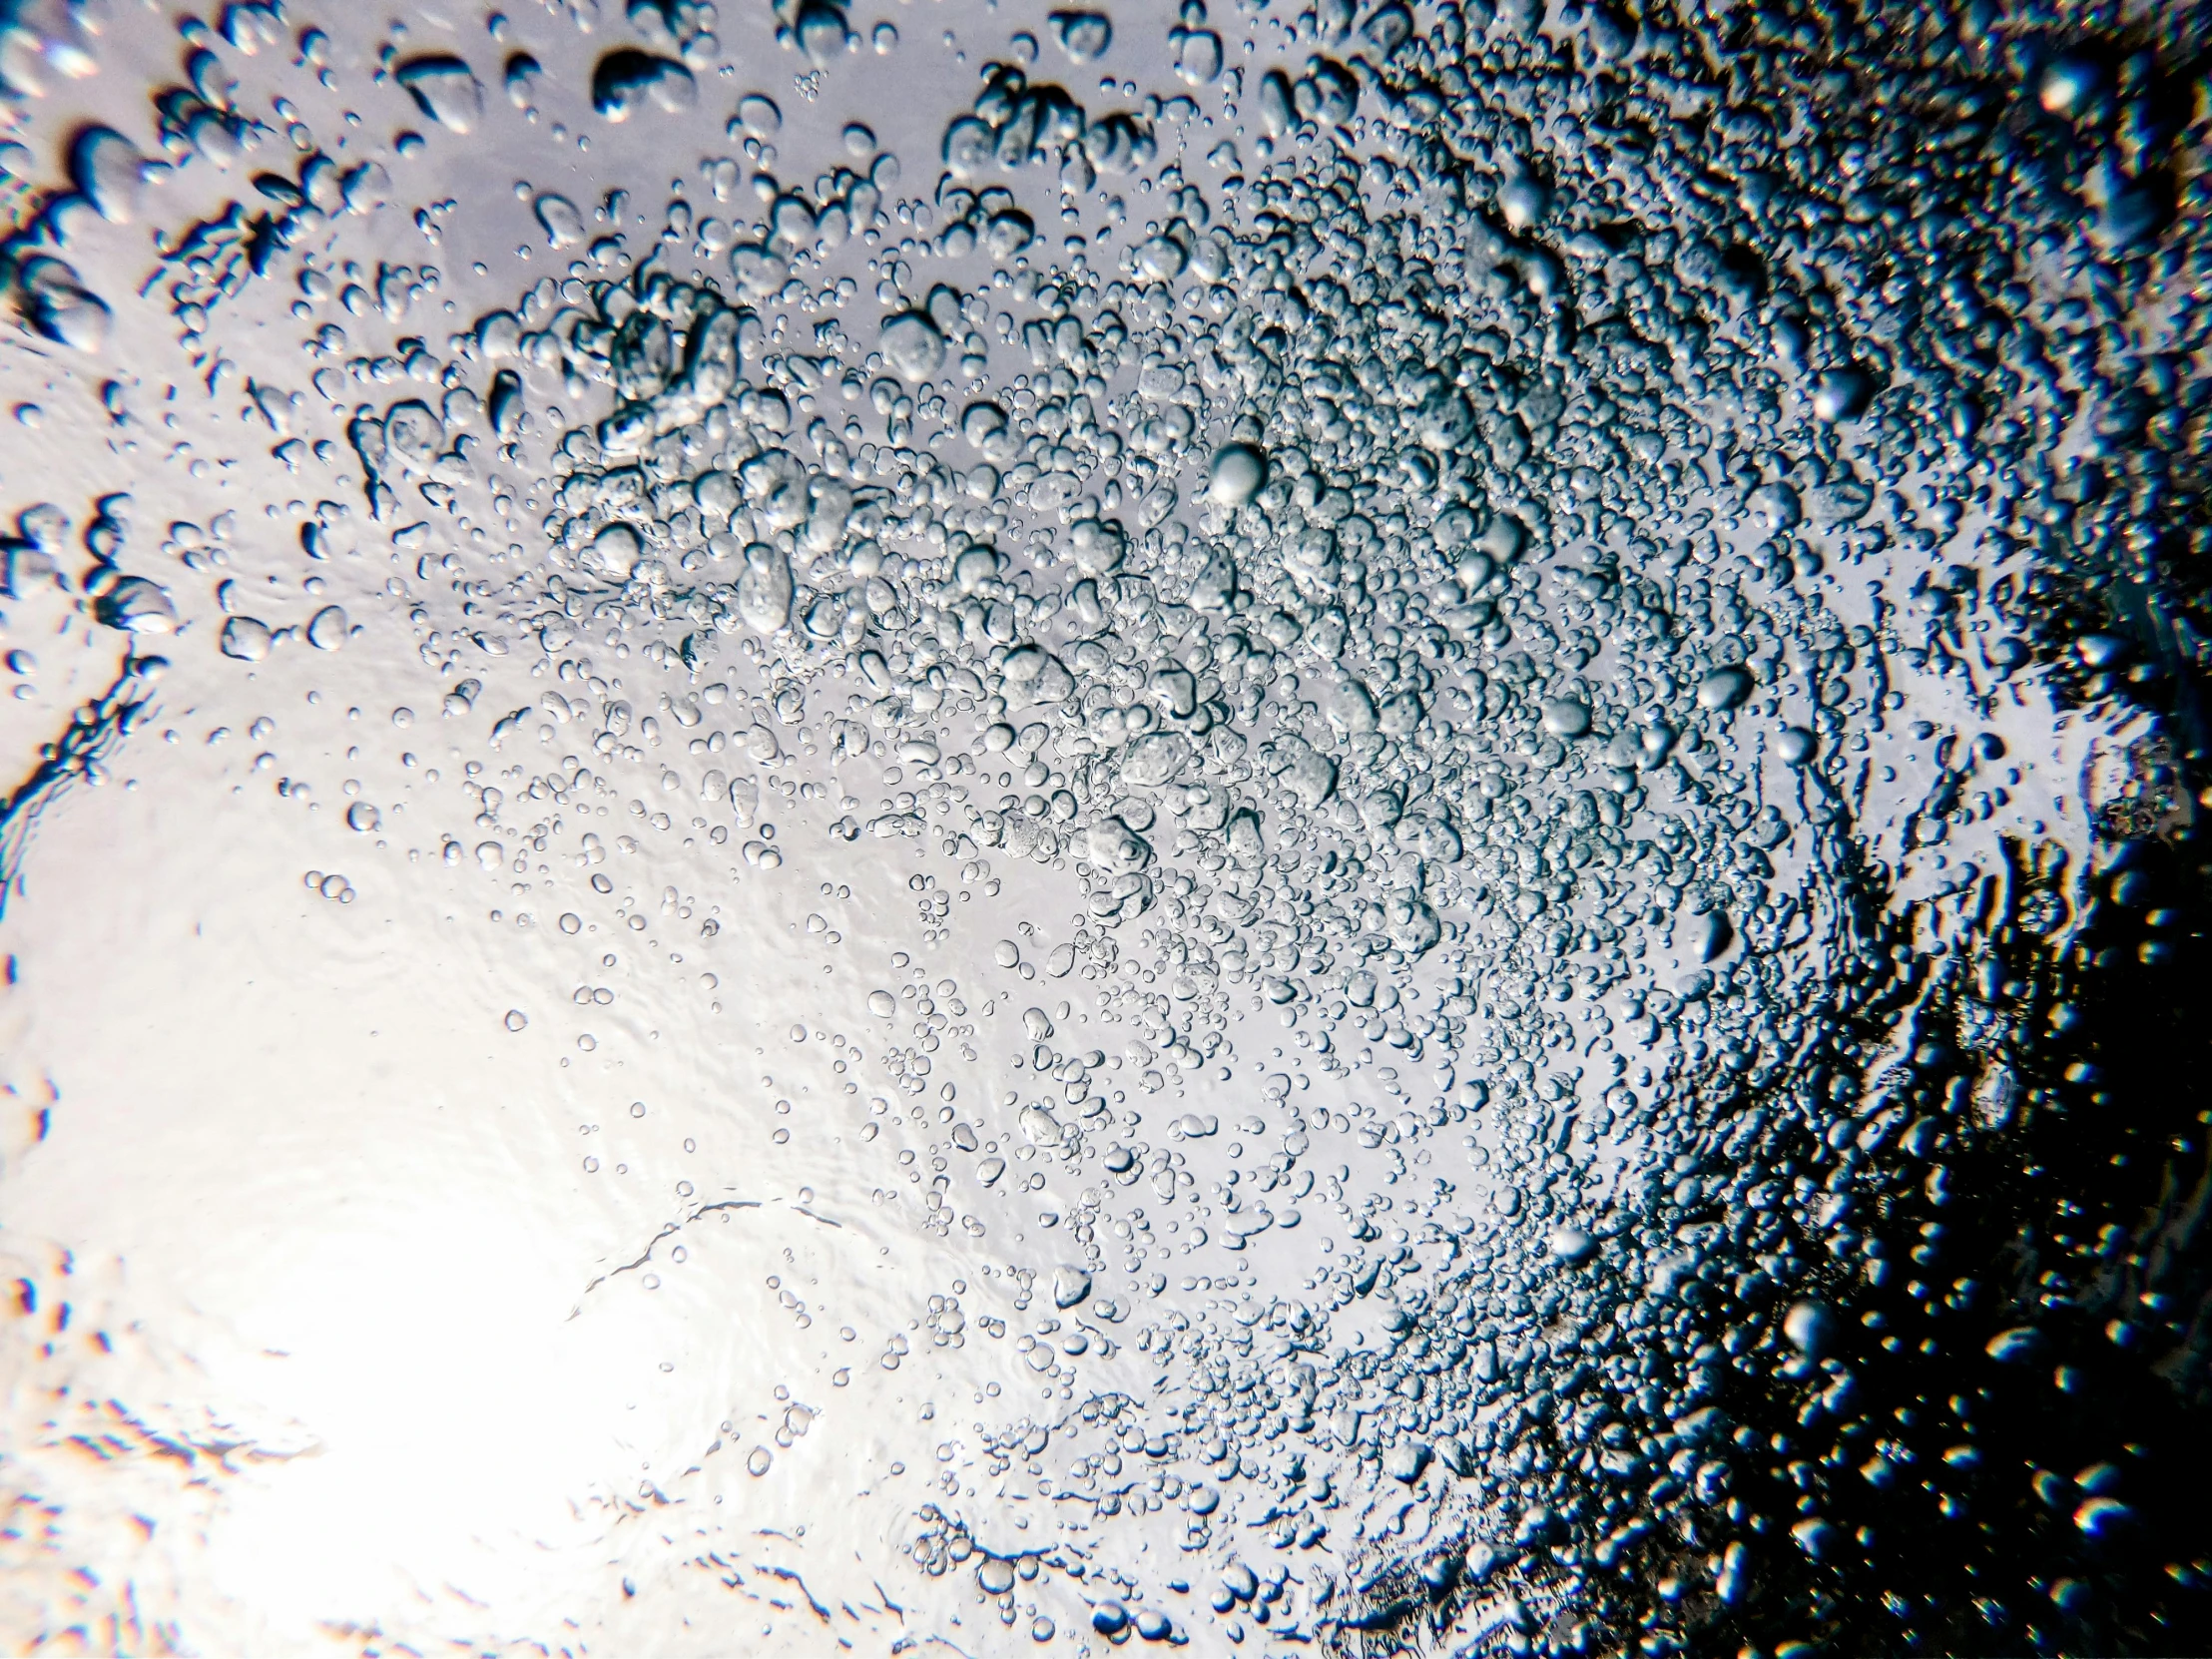 a close up of water droplets on a glass, inspired by Lucio Fontana, unsplash, auto-destructive art, volumetric light from below, looking towards camera, an eerie whirlpool, cellshaded